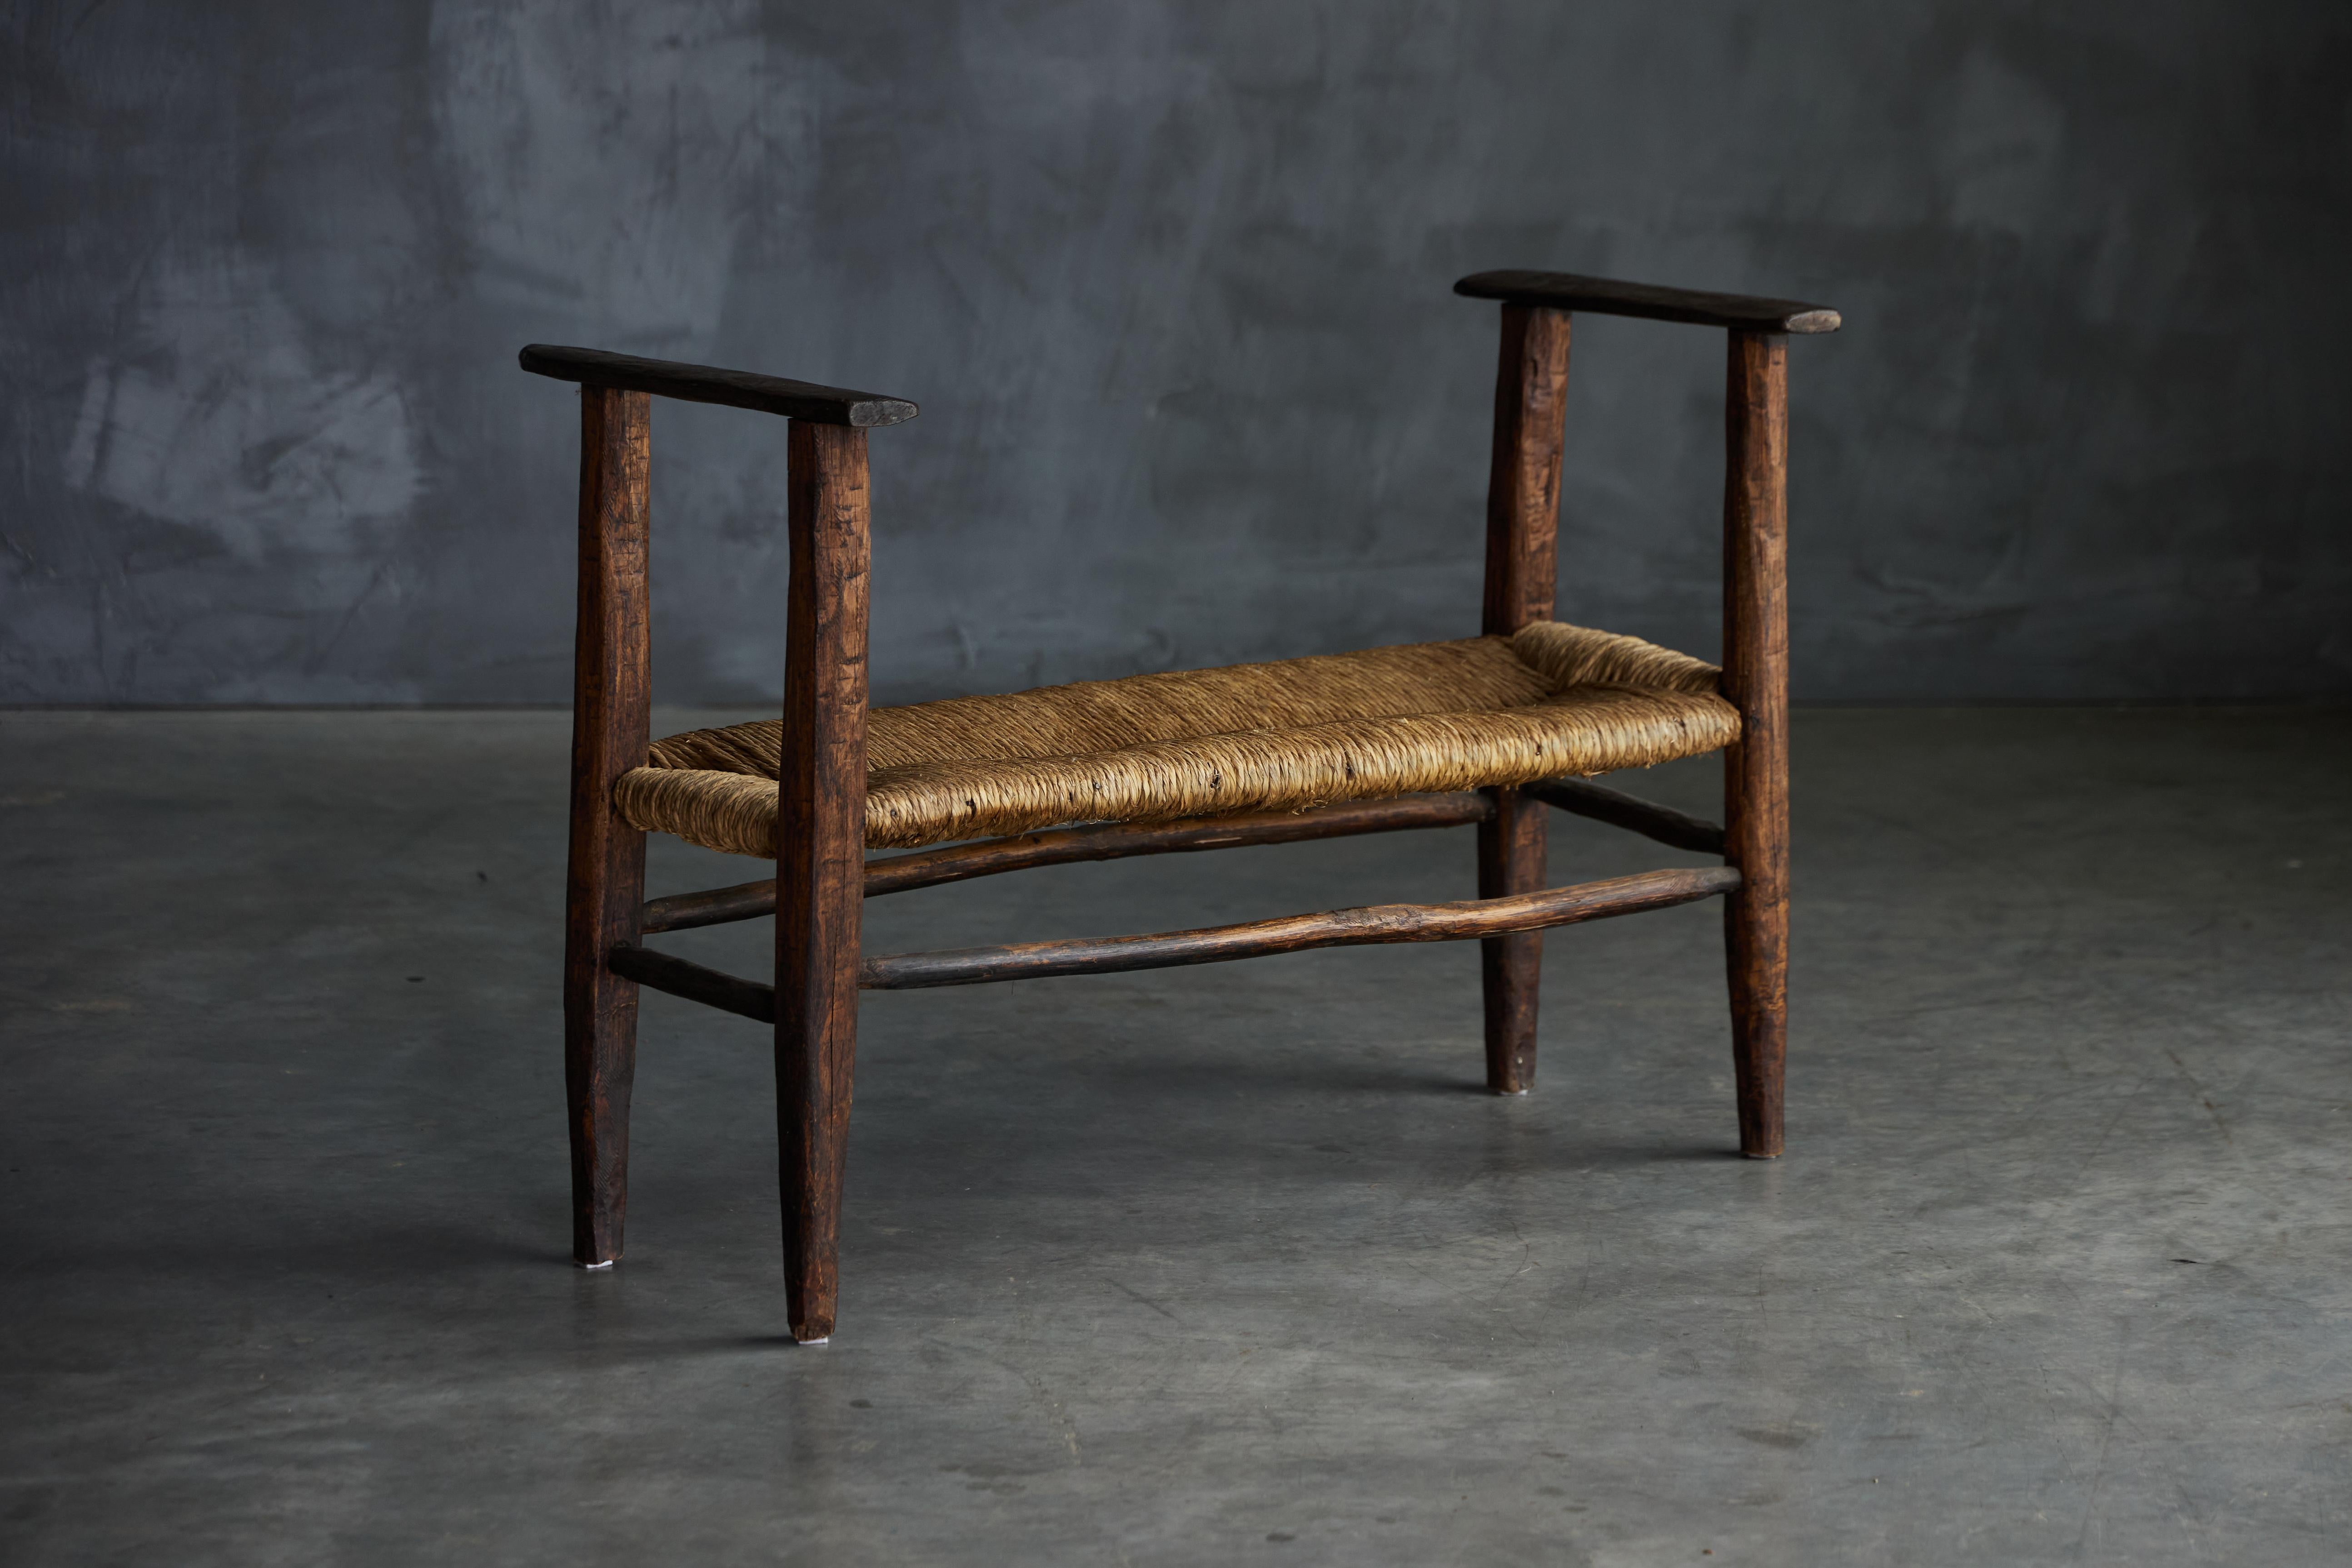 19th-century rustic wabi sabi bench, a unique piece hailing from the picturesque region of Auvergne in the heart of Rhône-Alpes, Cantal, France. Handcrafted from the finest dark solid wood, this exceptional piece embodies the region's distinct